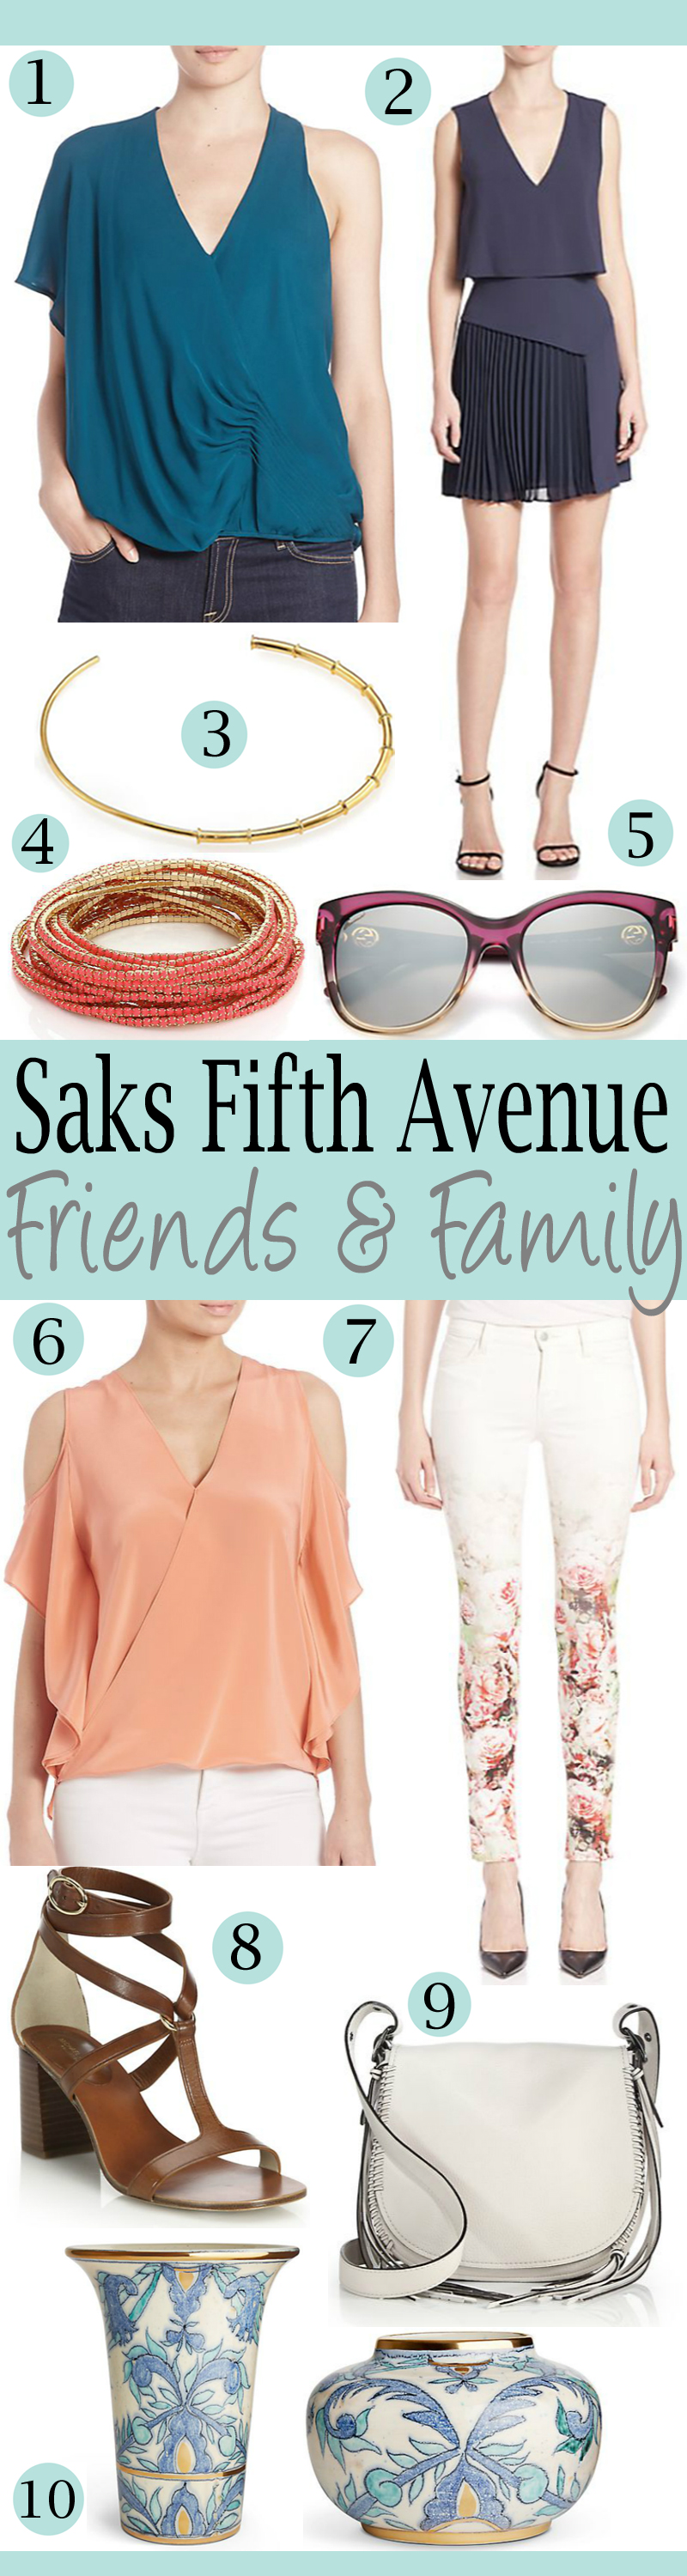 saks-fifth-avenue-thank-you-sale-2016